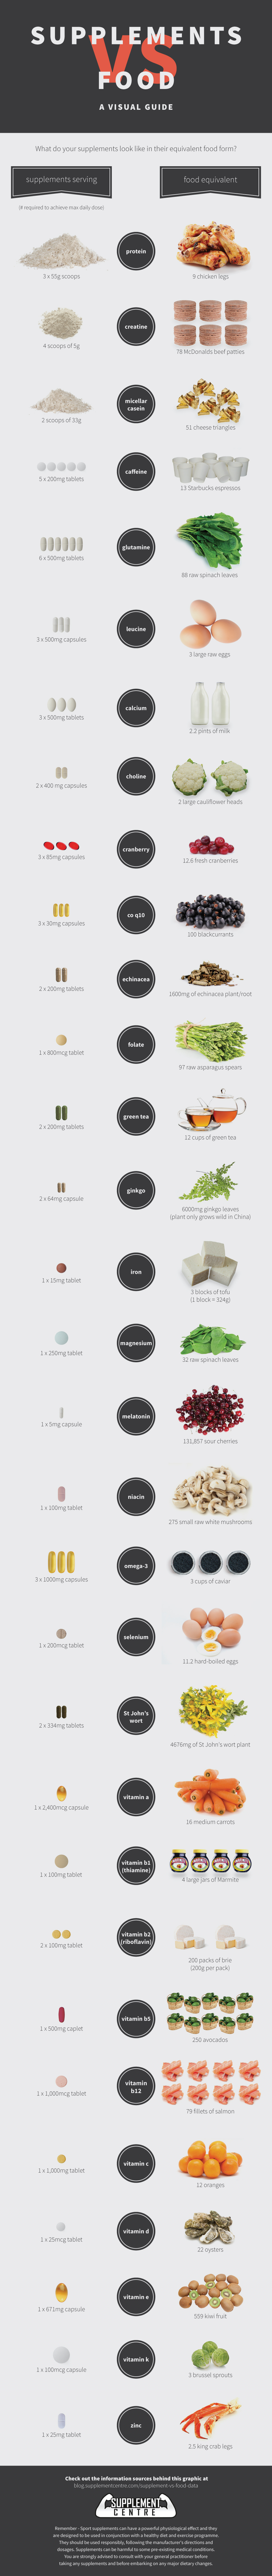 Supplements Vs Food – A Visual Guide